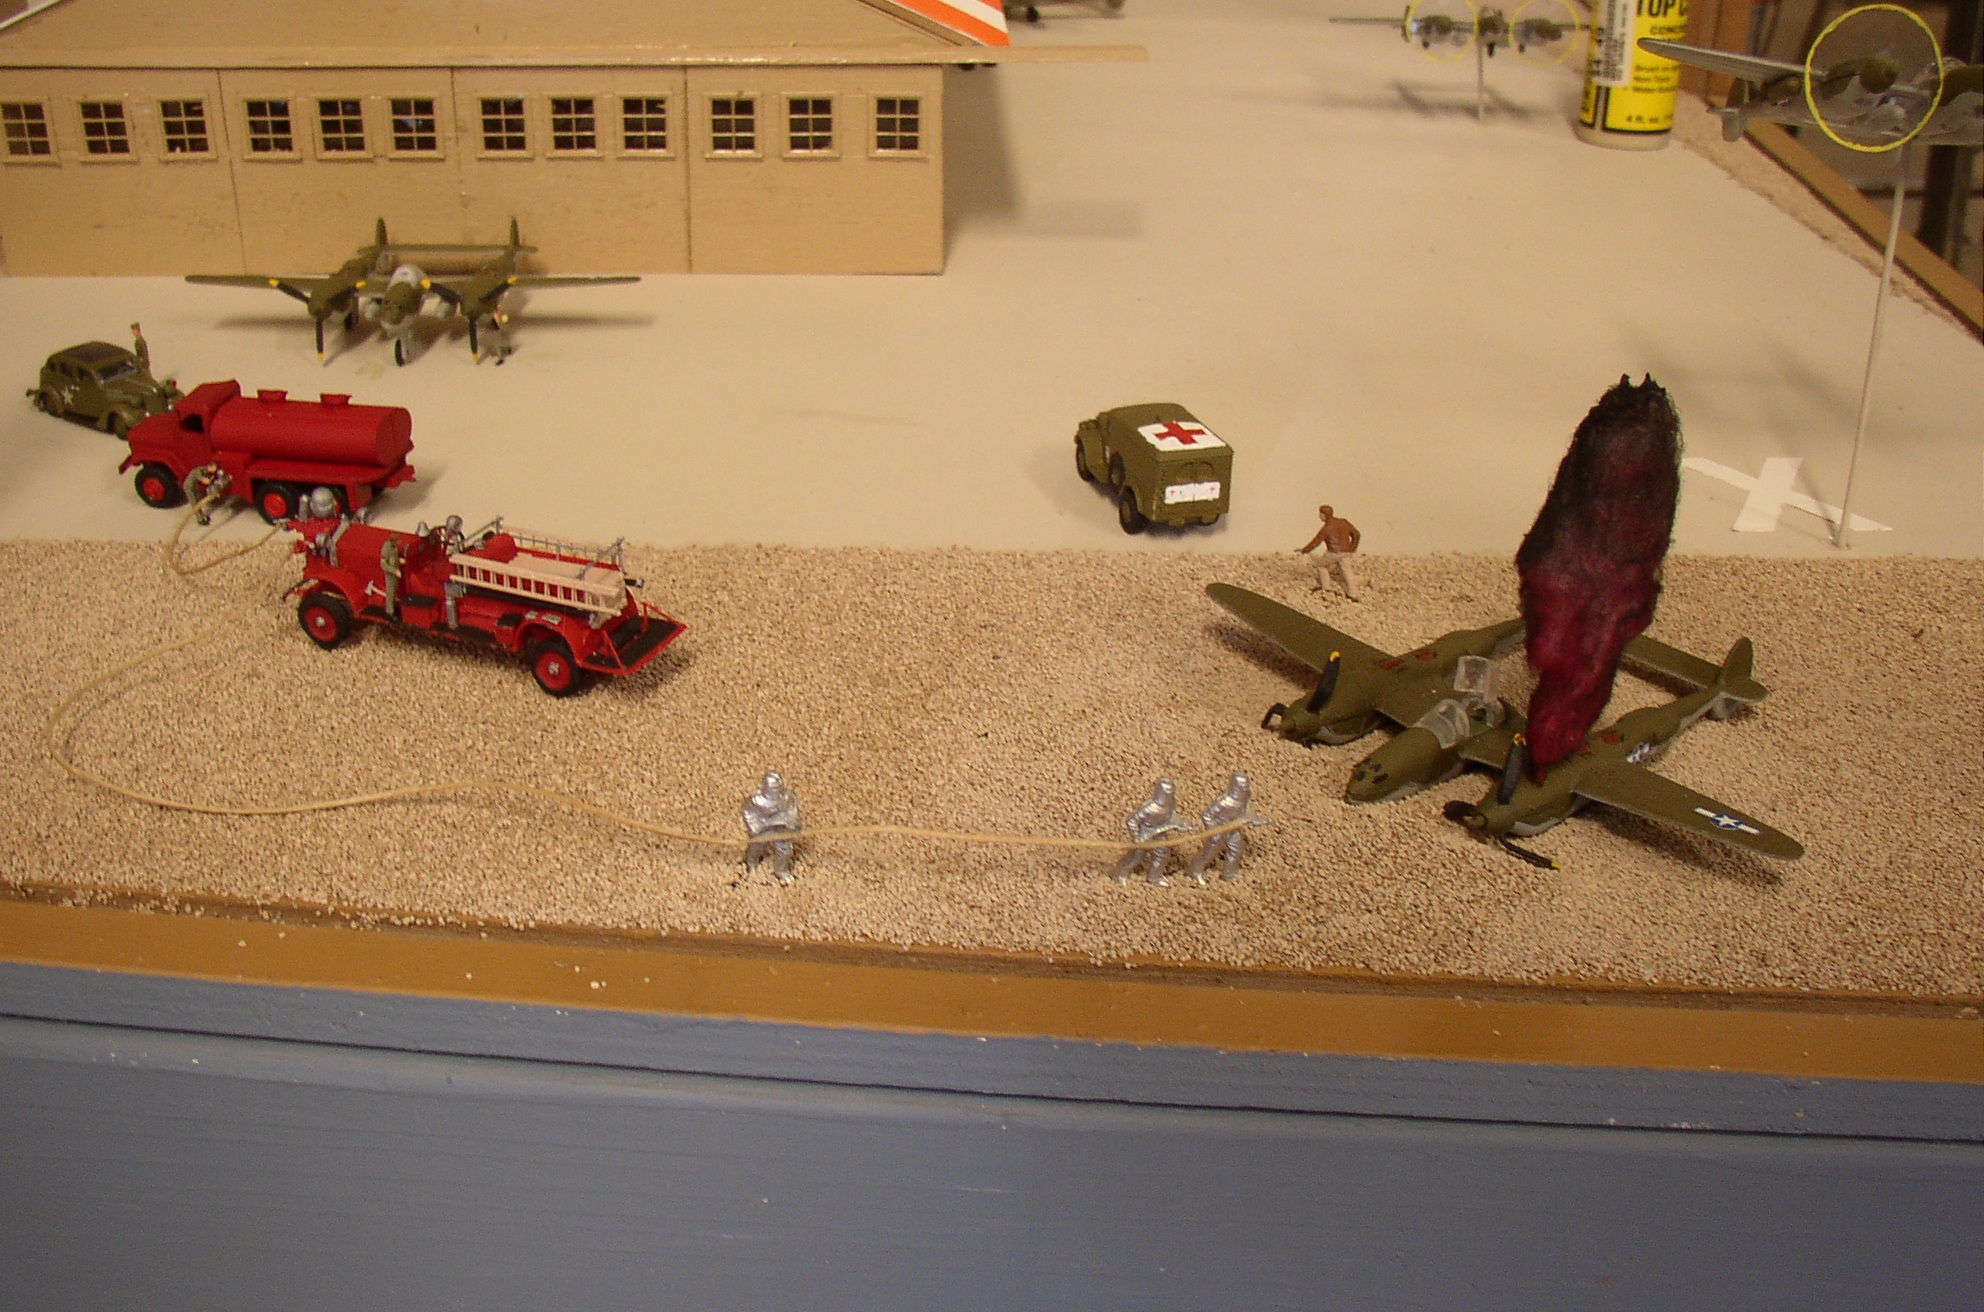 Diorama Uh-oh. Pilot running to safety after a crash. Cue the fire trucks.